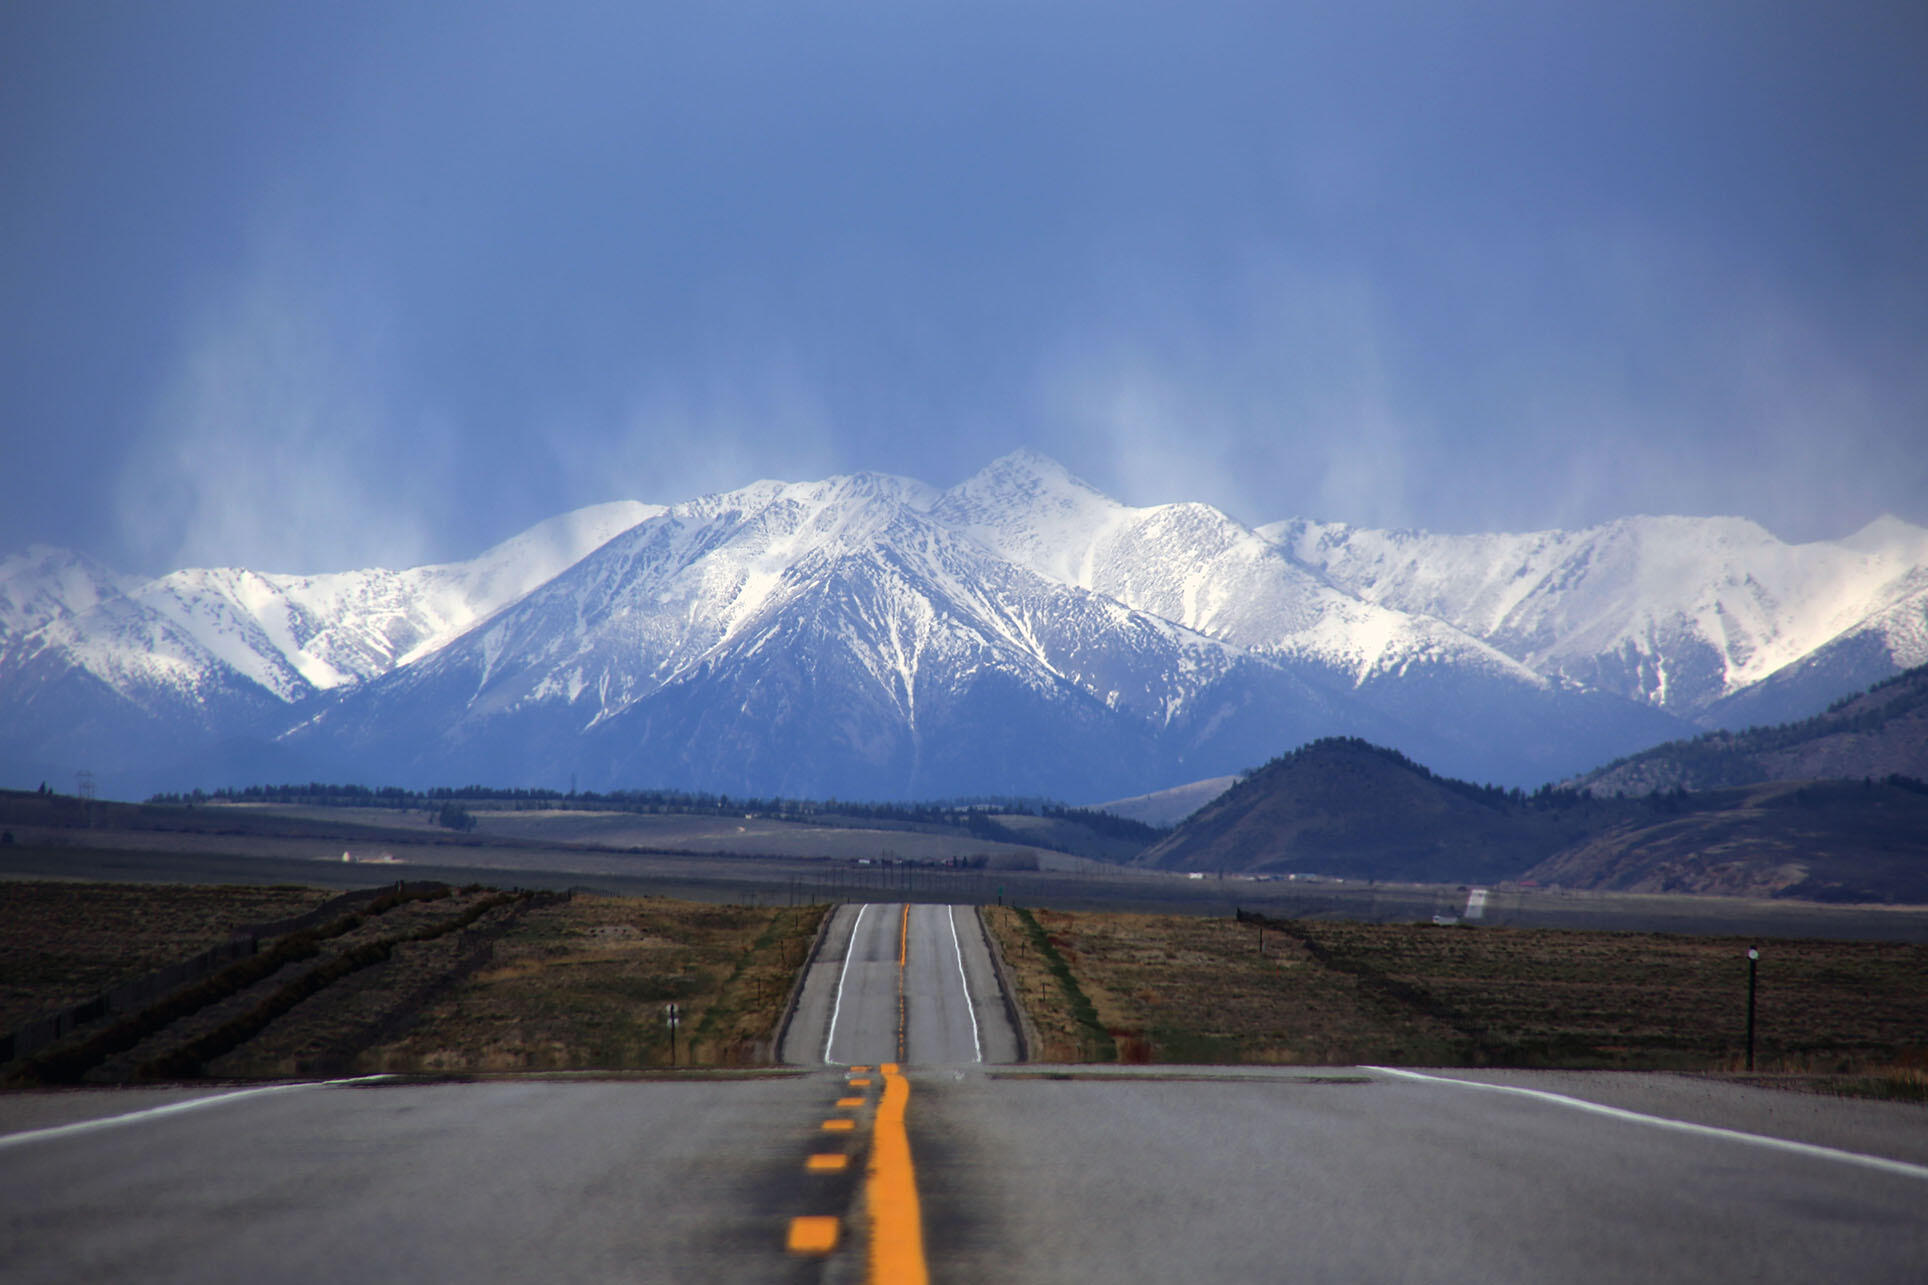 A road vanishes into the distances towards snow-capped mountains in a Colorado landscape. (Photo by Jason Leverton.)